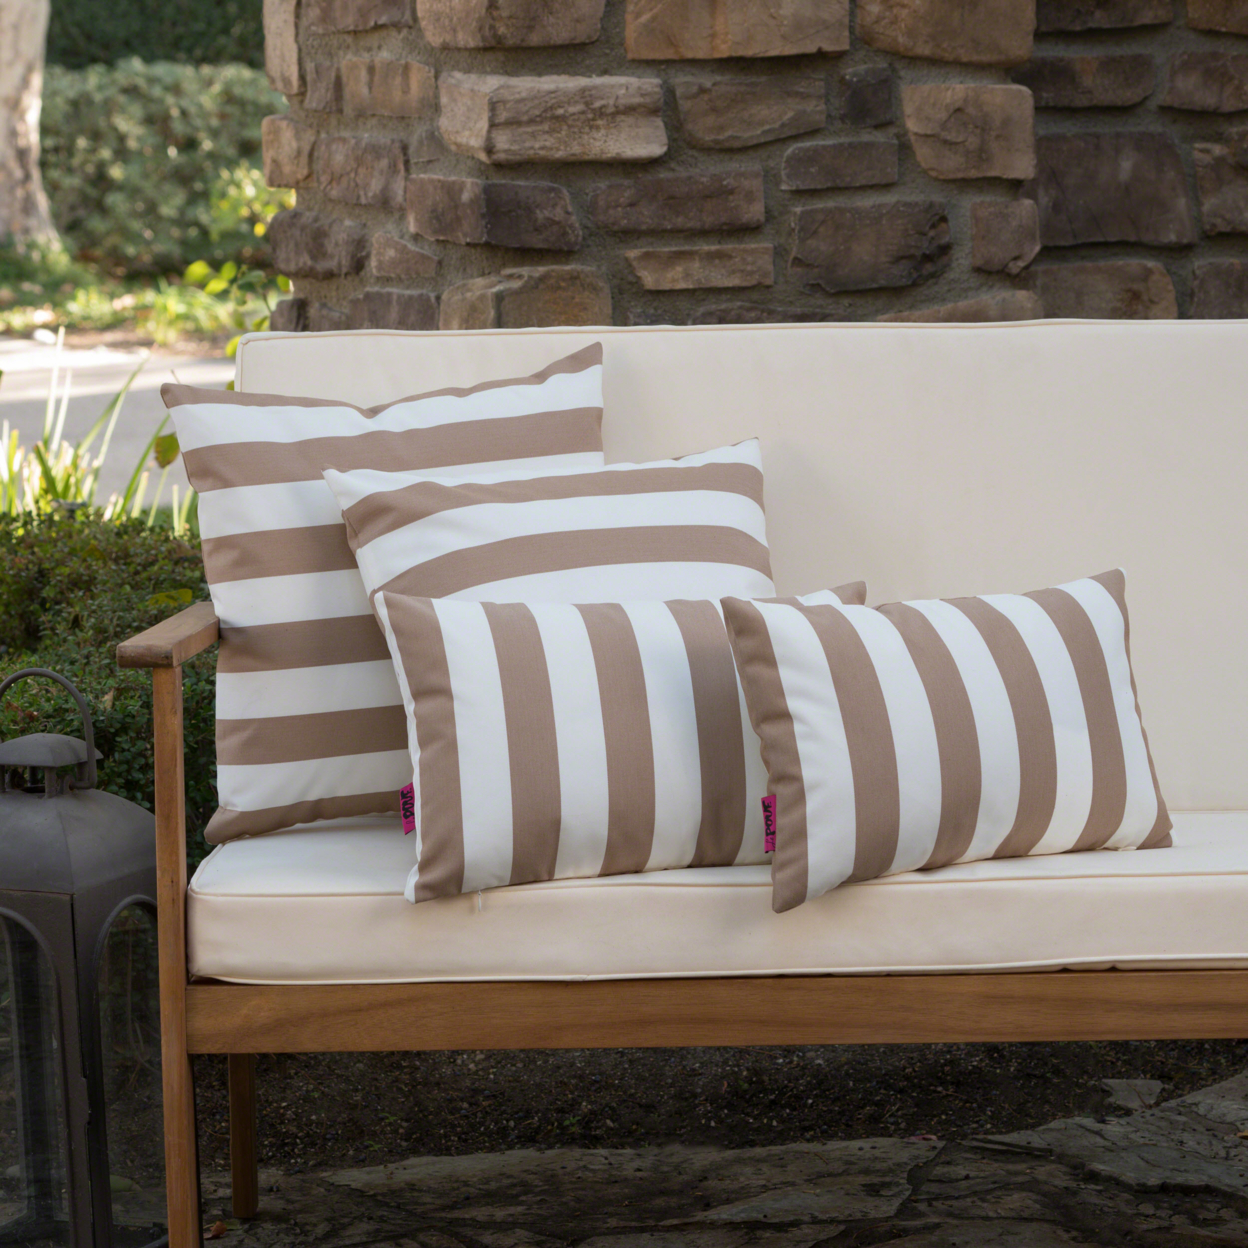 La Jolla Outdoor Water Resistant Square And Rectangular Throw Pillows - Set Of 4 - Brown/White